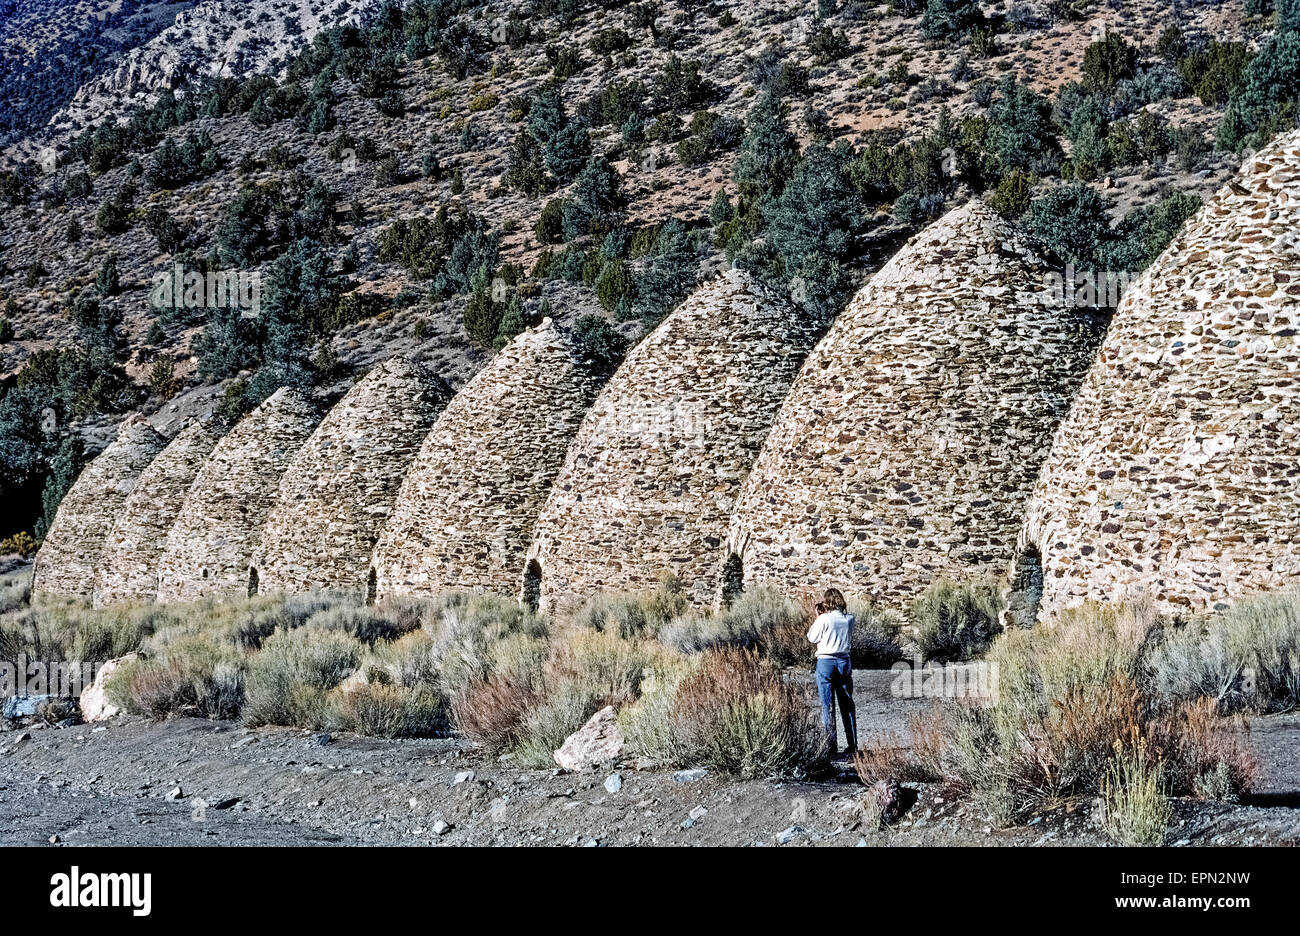 A tourist photographs some of the historic beehive-shaped charcoal kilns built in 1877 to make charcoal for ore smelters used in silver and lead mining operations nearby Death Valley, California, USA. The rock and mortar structures were constructed in Wildrose Canyon in the Panamint Mountains near sources of wood that included pine and juniper trees, which were slowly burned for a week to create the charcoal. The 10 kilns were abandoned when the mines shut down but were restored a century later and have become an attraction in Death Valley National Park. Stock Photo